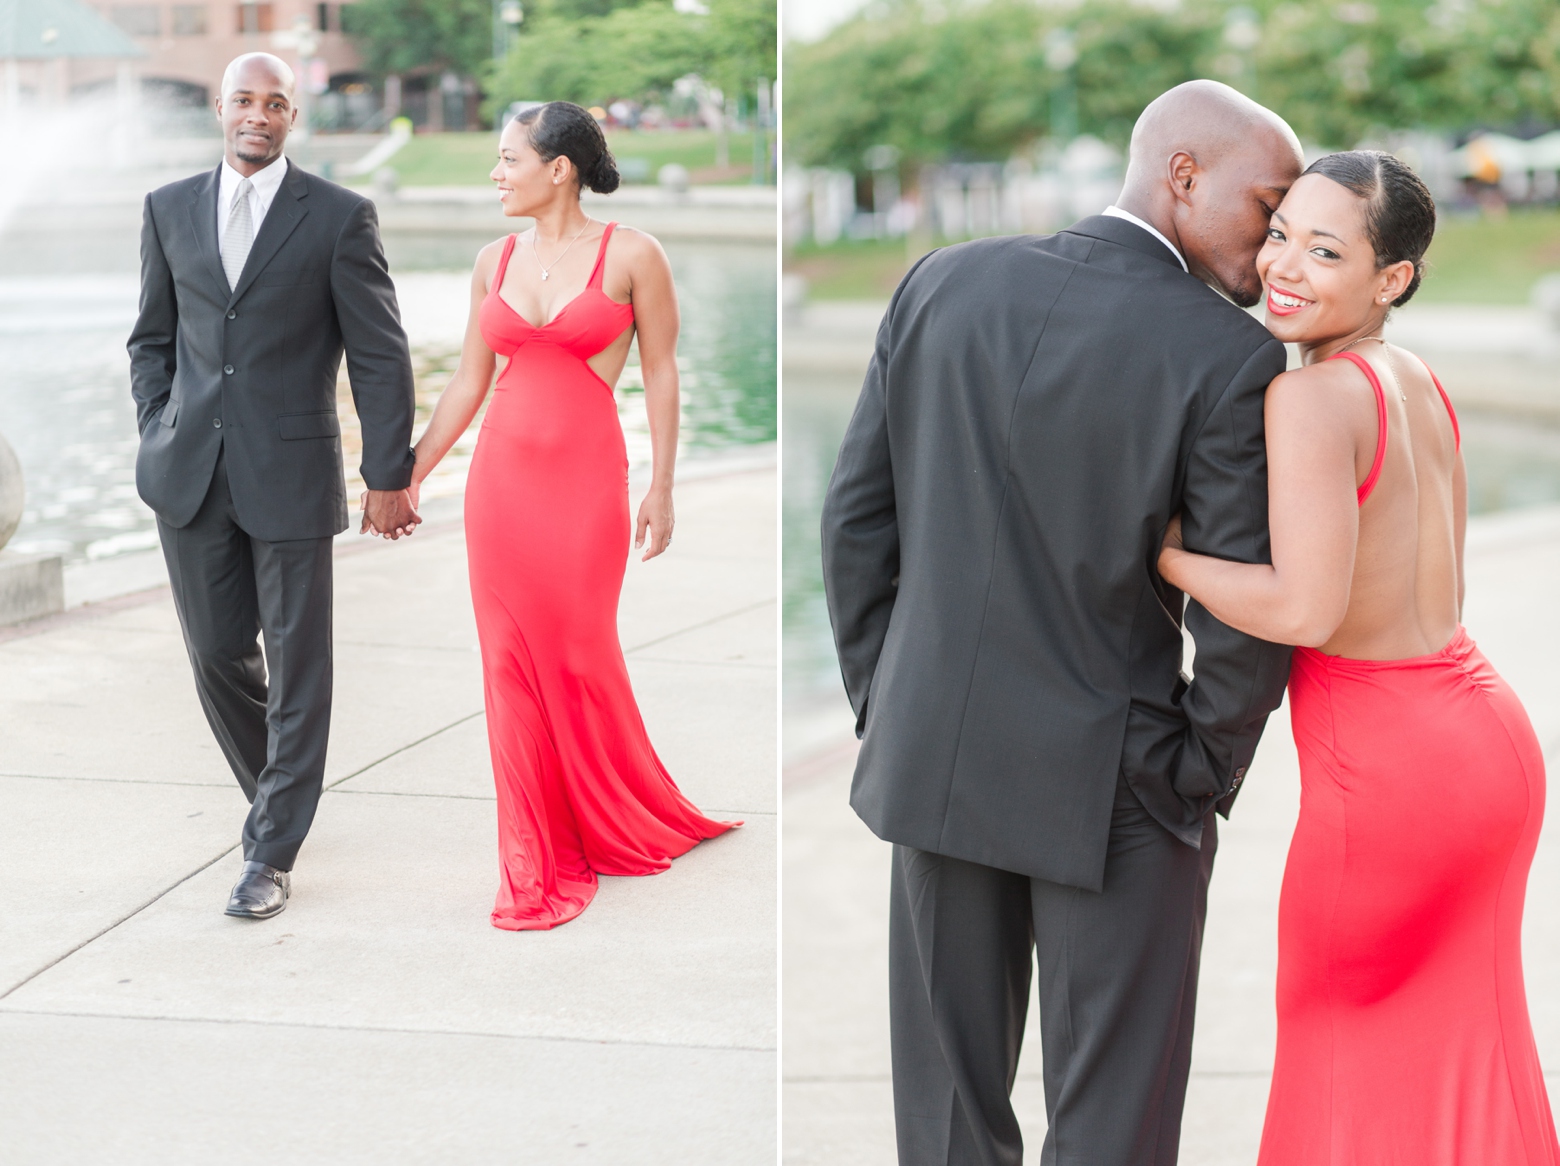 Newport News City Center Couples Photography by Angie McPherson Photography